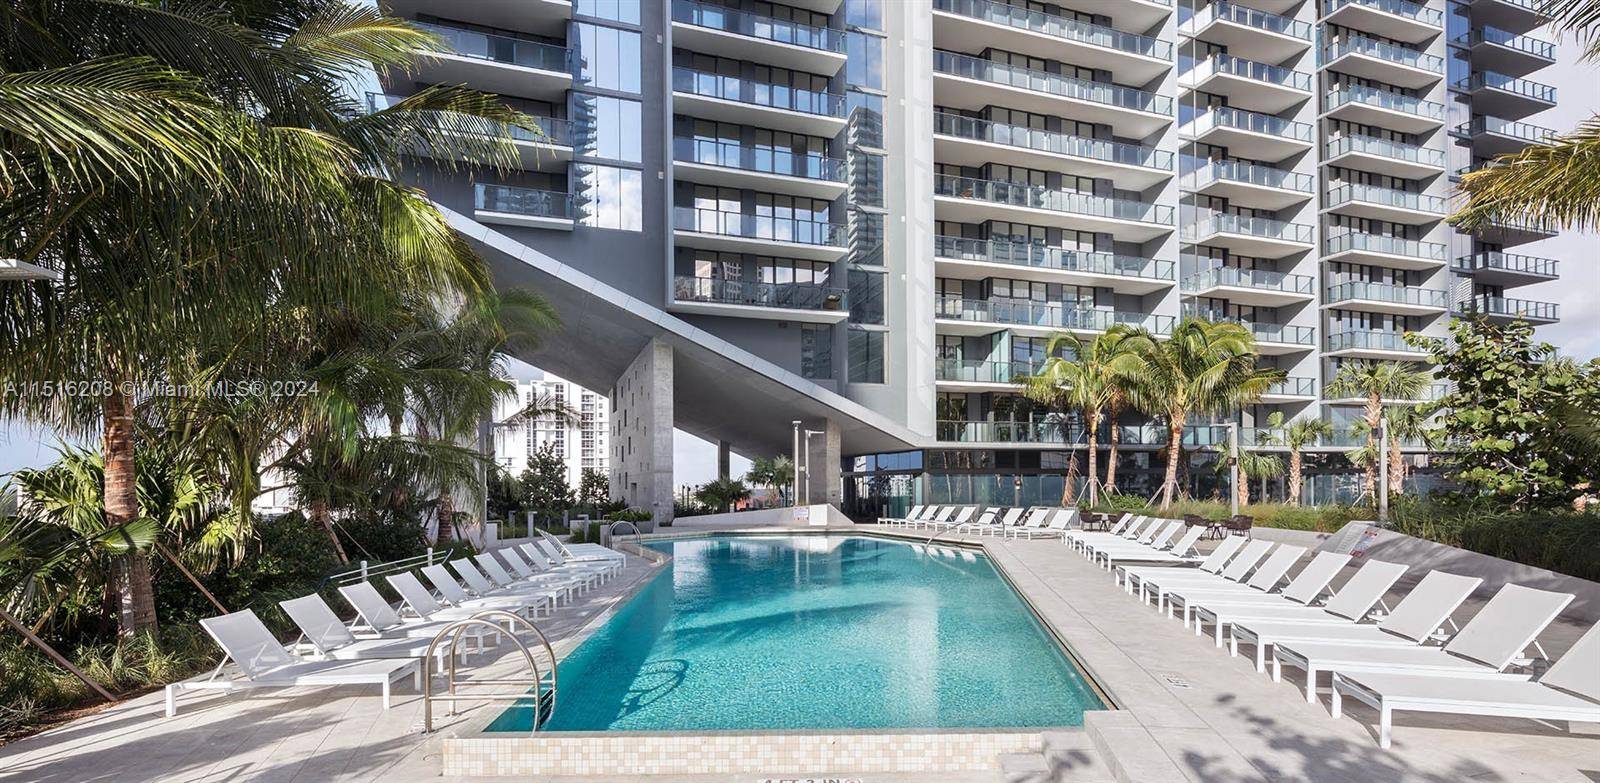 Beautiful apartment in Rise, Brickell City Center.